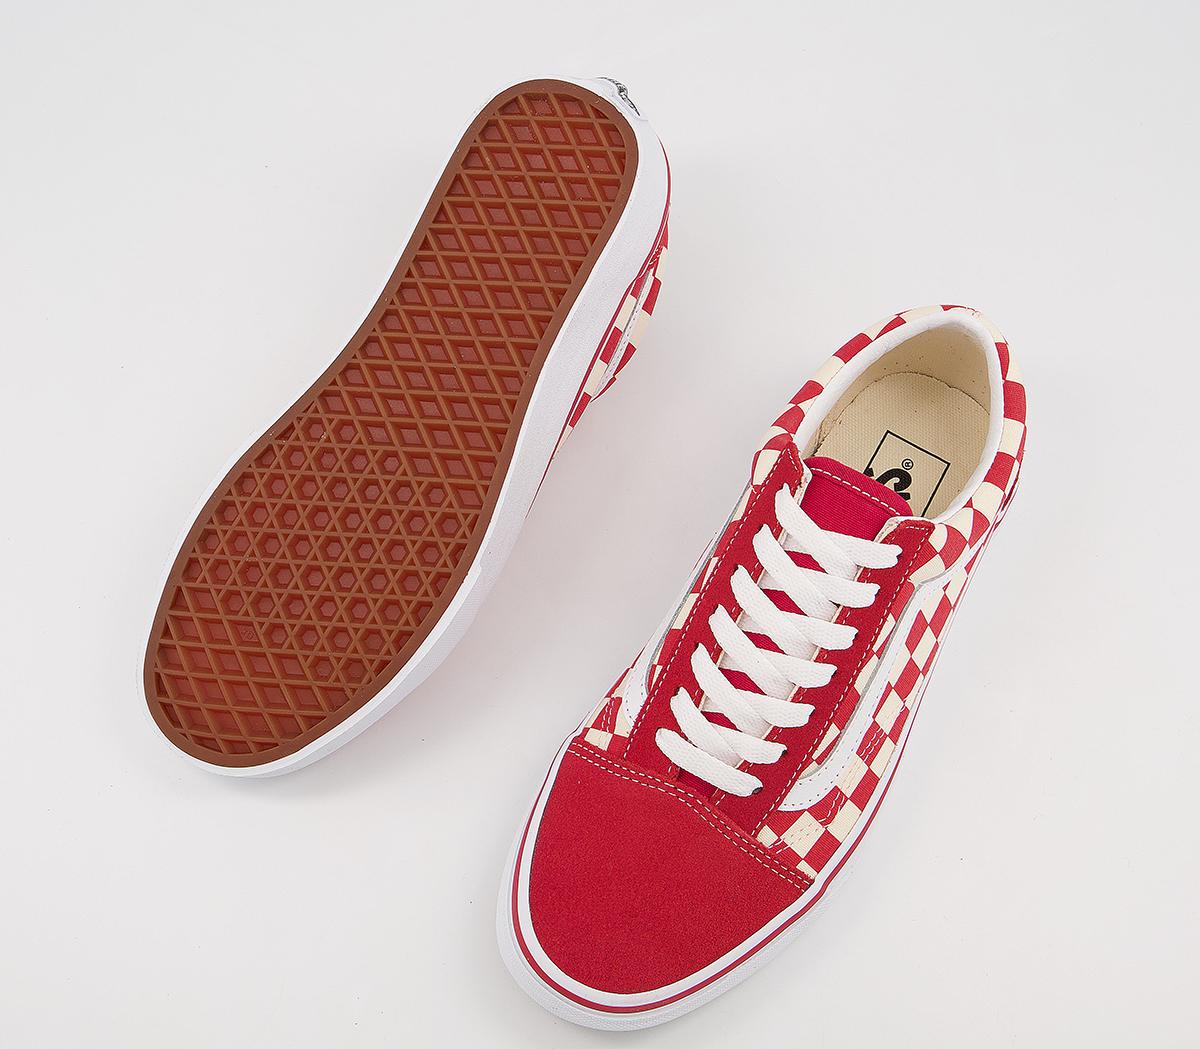 Vans Old Skool Trainers Red White Primary Check - Unisex Sports